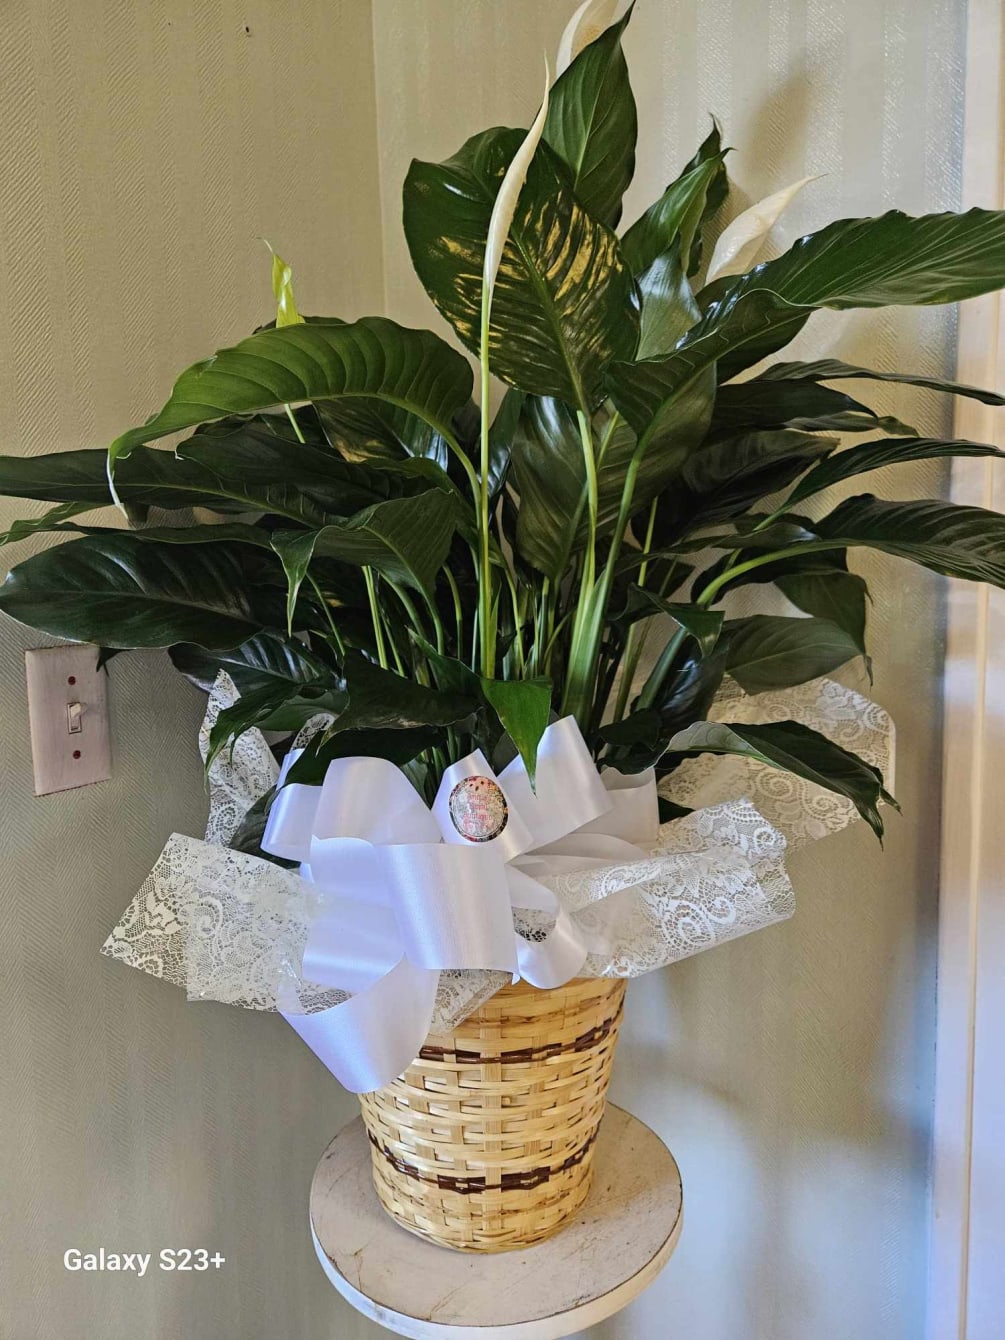 This beautiful peace lily is in a 8 inch planting pot, it